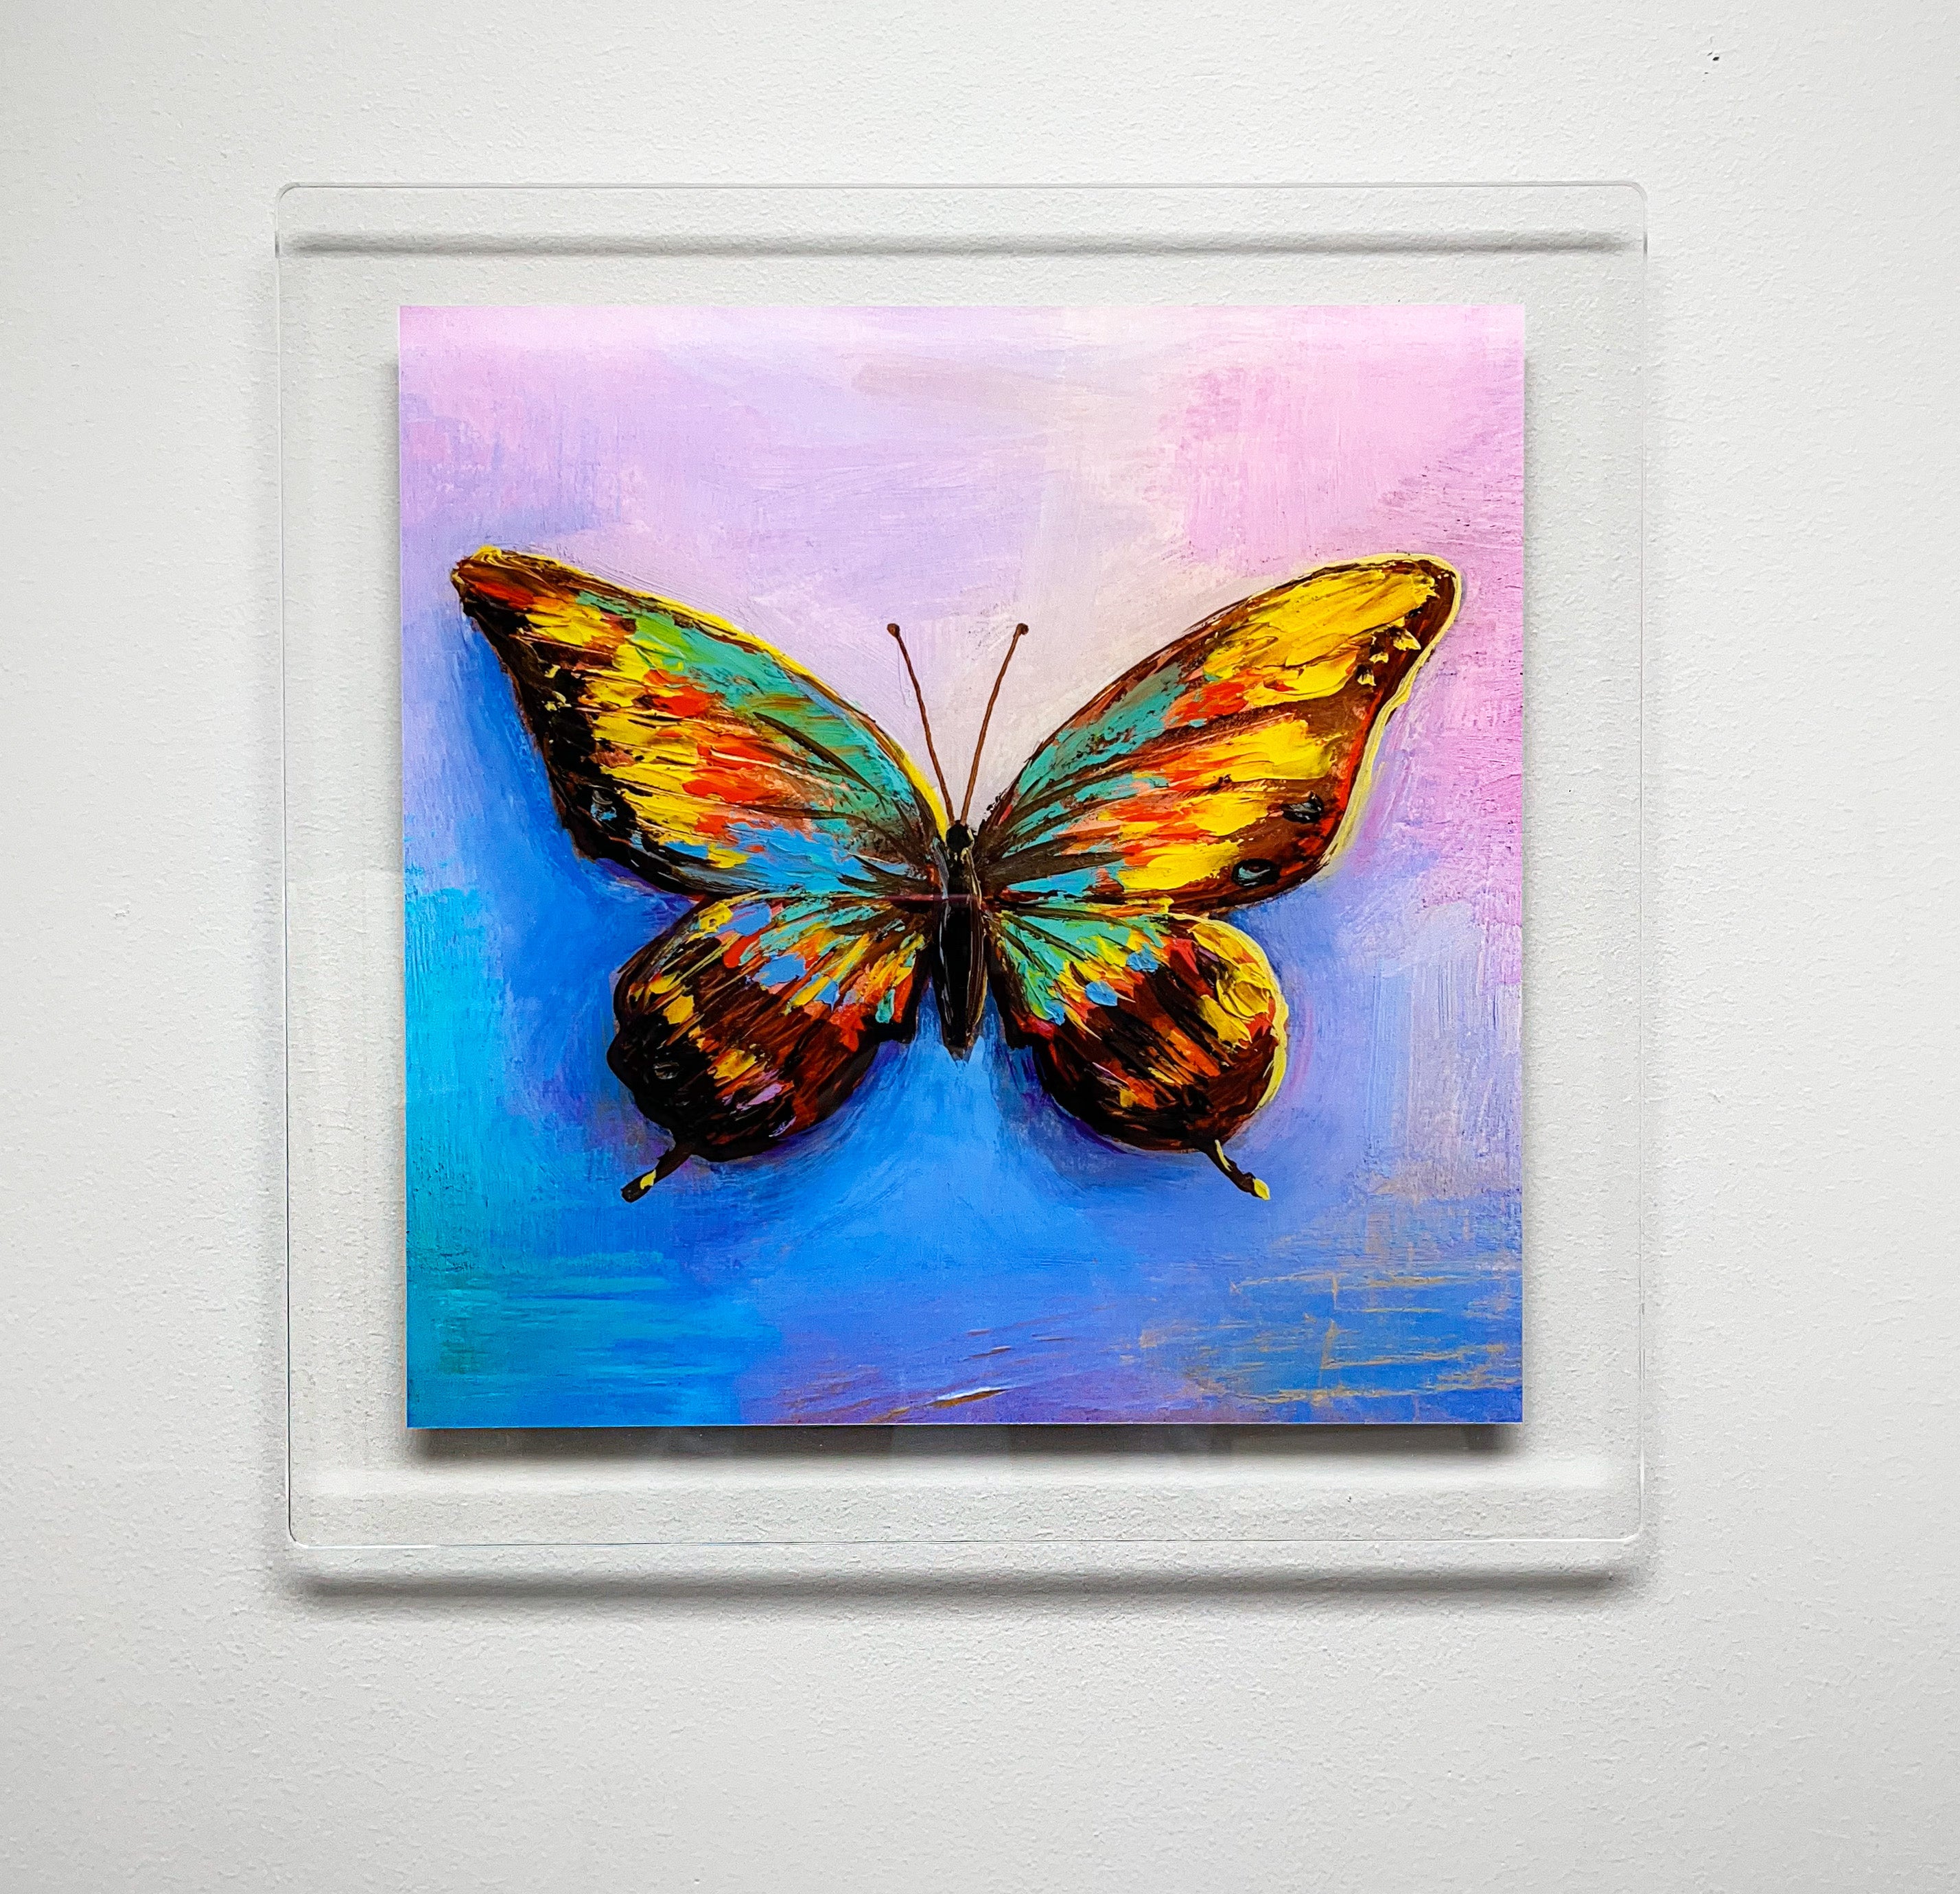 Acrylic Giclee hanging on wall. Acrylic Giclee print Butterfly painting art Wall-mounted Giclee Giclee canvas artwork High-quality acrylic print Fine art reproduction Wall-hanging butterfly Giclee Contemporary acrylic painting Giclee wall decor Butterfly art print Acrylic Giclee on canvas Premium wall art Giclee home decor Acrylic print of butterfly Museum-quality Giclee Vibrant butterfly painting Giclee wall hanging Artistic acrylic reproduction Home gallery decor Butterfly masterpiece Giclee